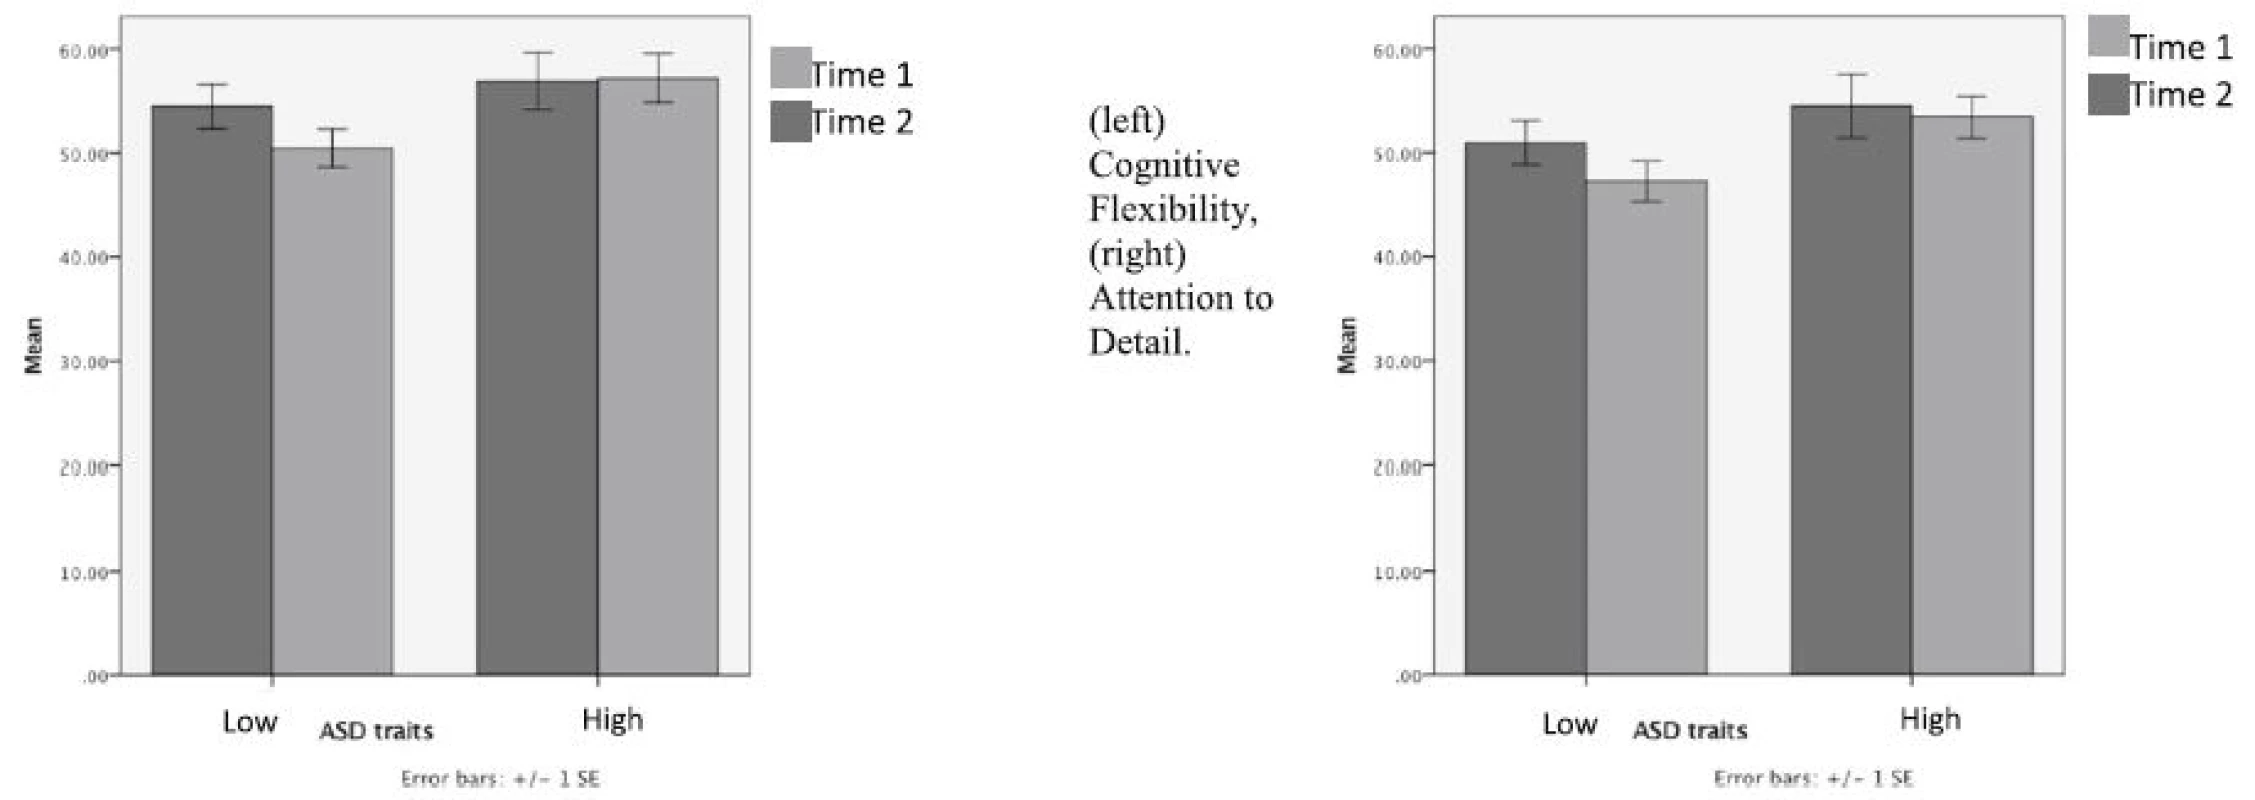 Repeated measures T-tests: cognitive flexibility and attention to details subscales